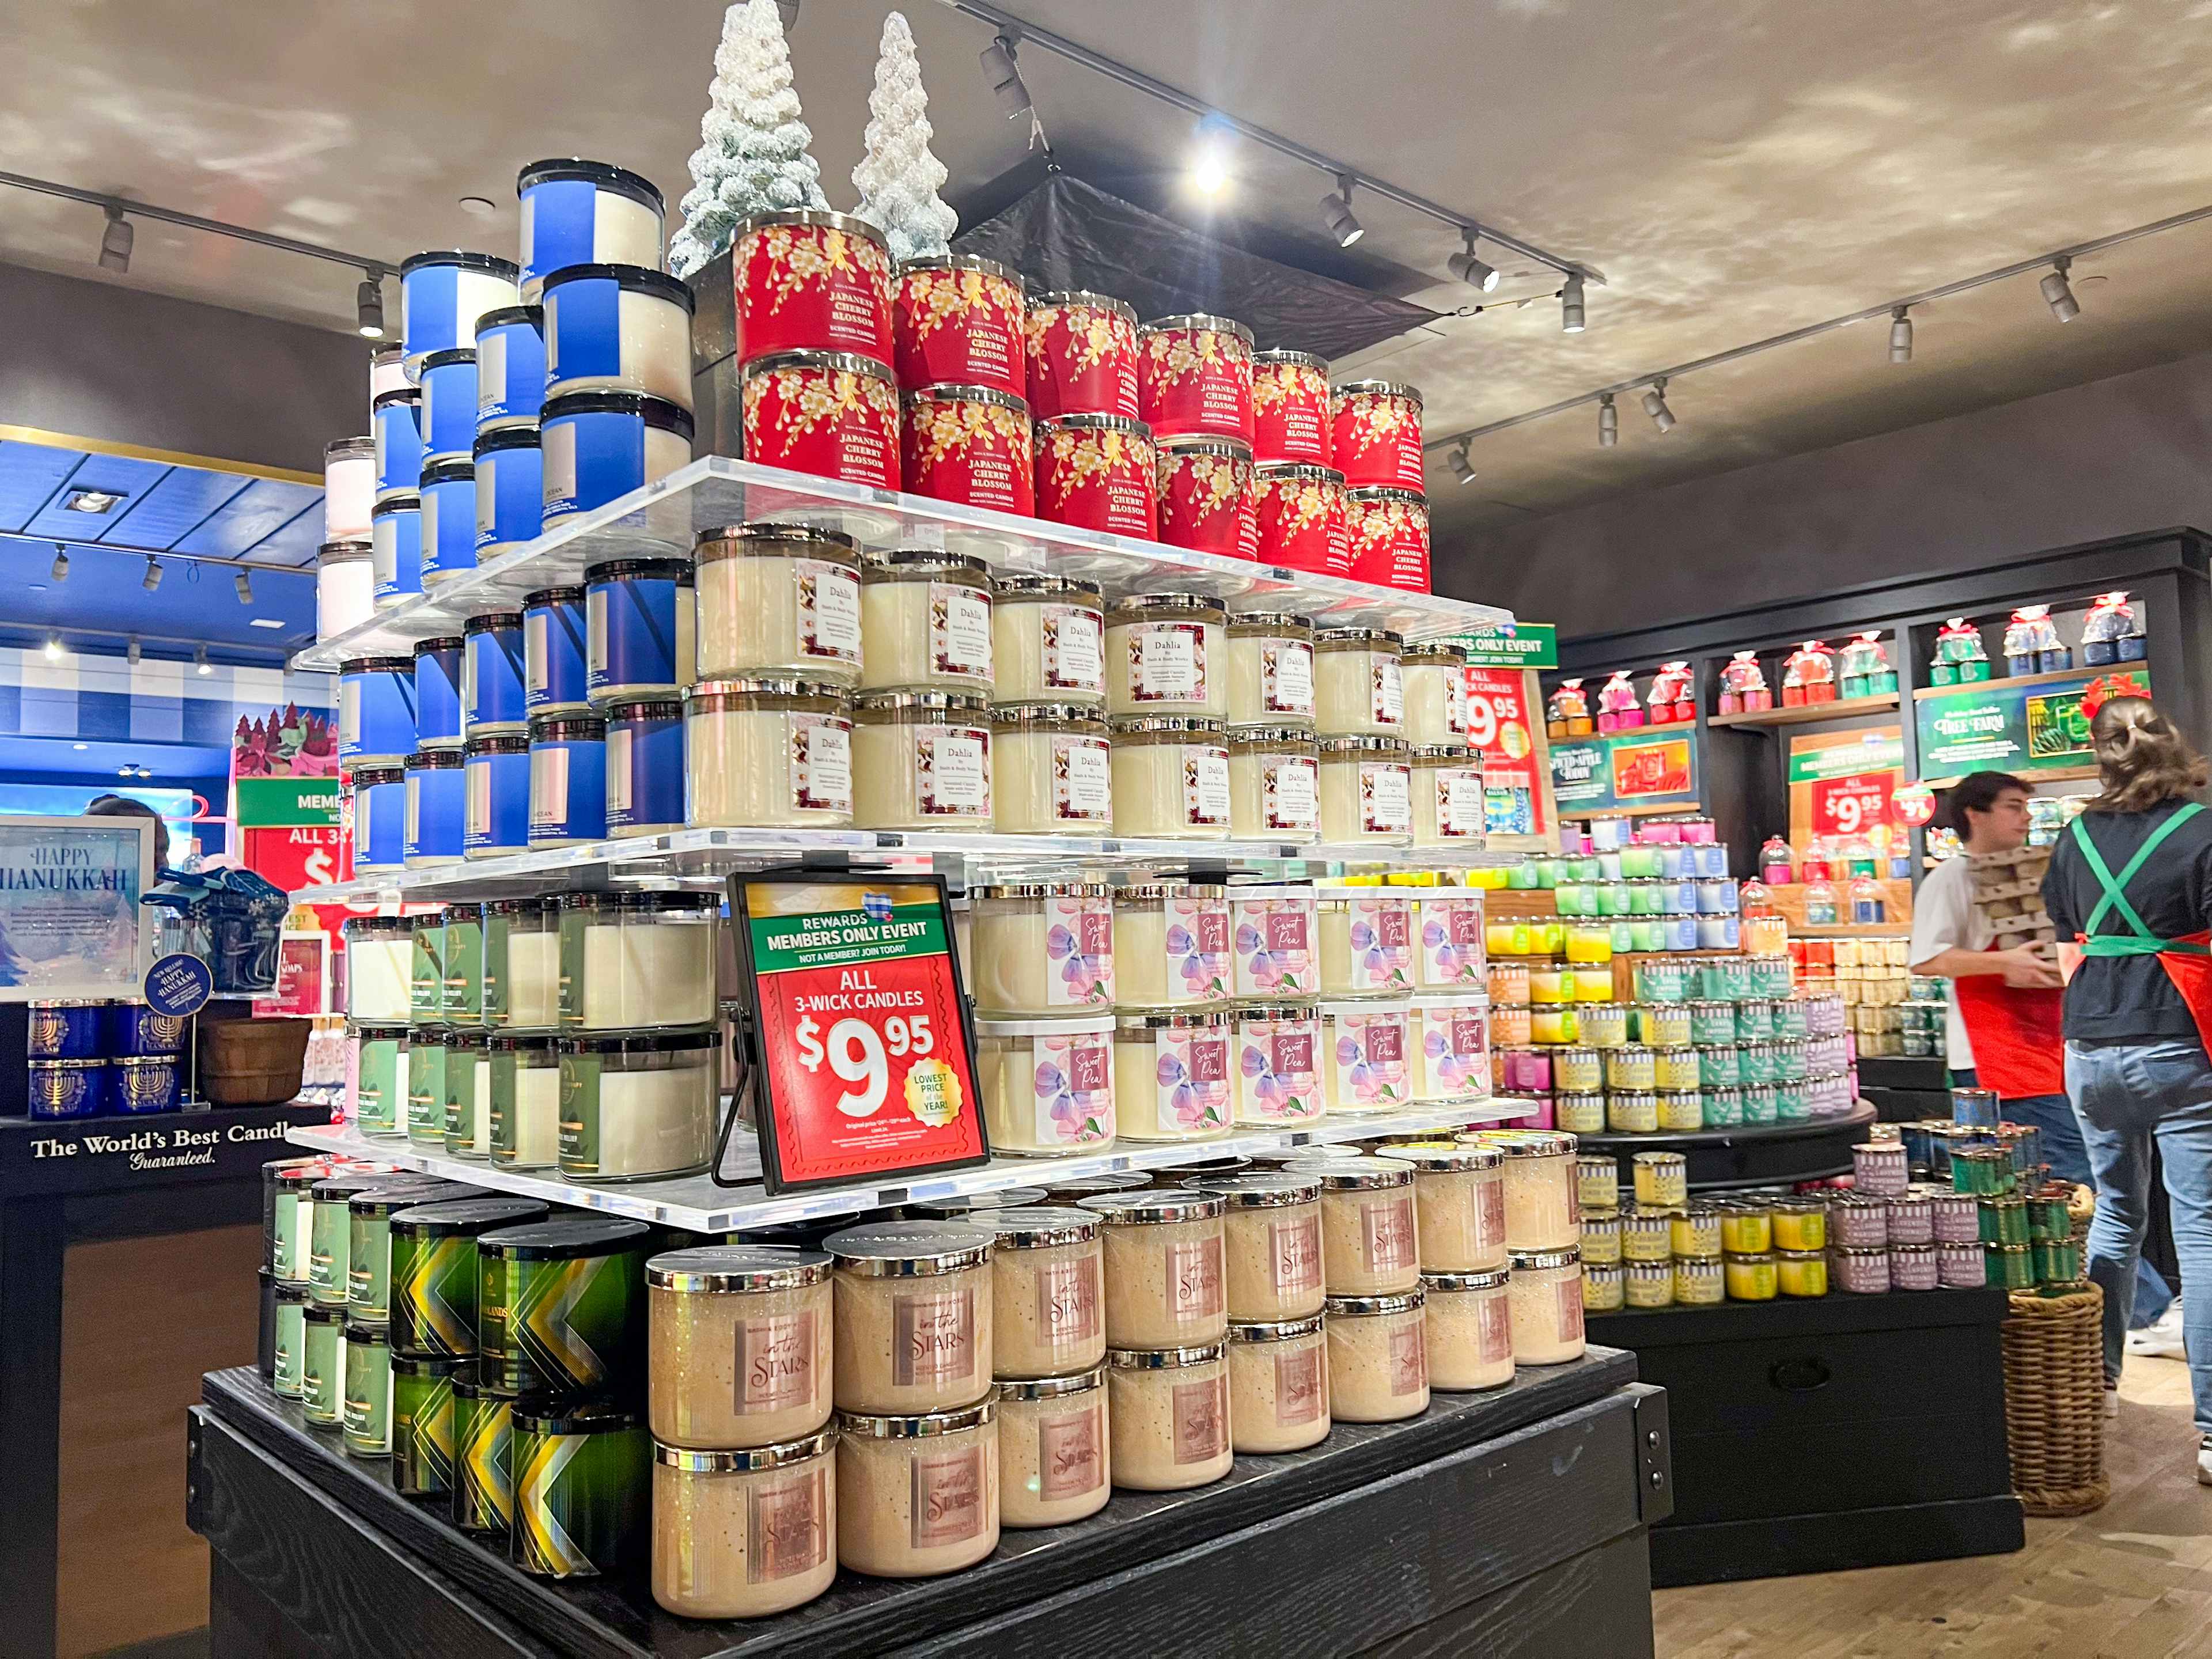 Large display of candles during the candle day sale at Bath and Body works . Small red sign showing the offer of $9.995